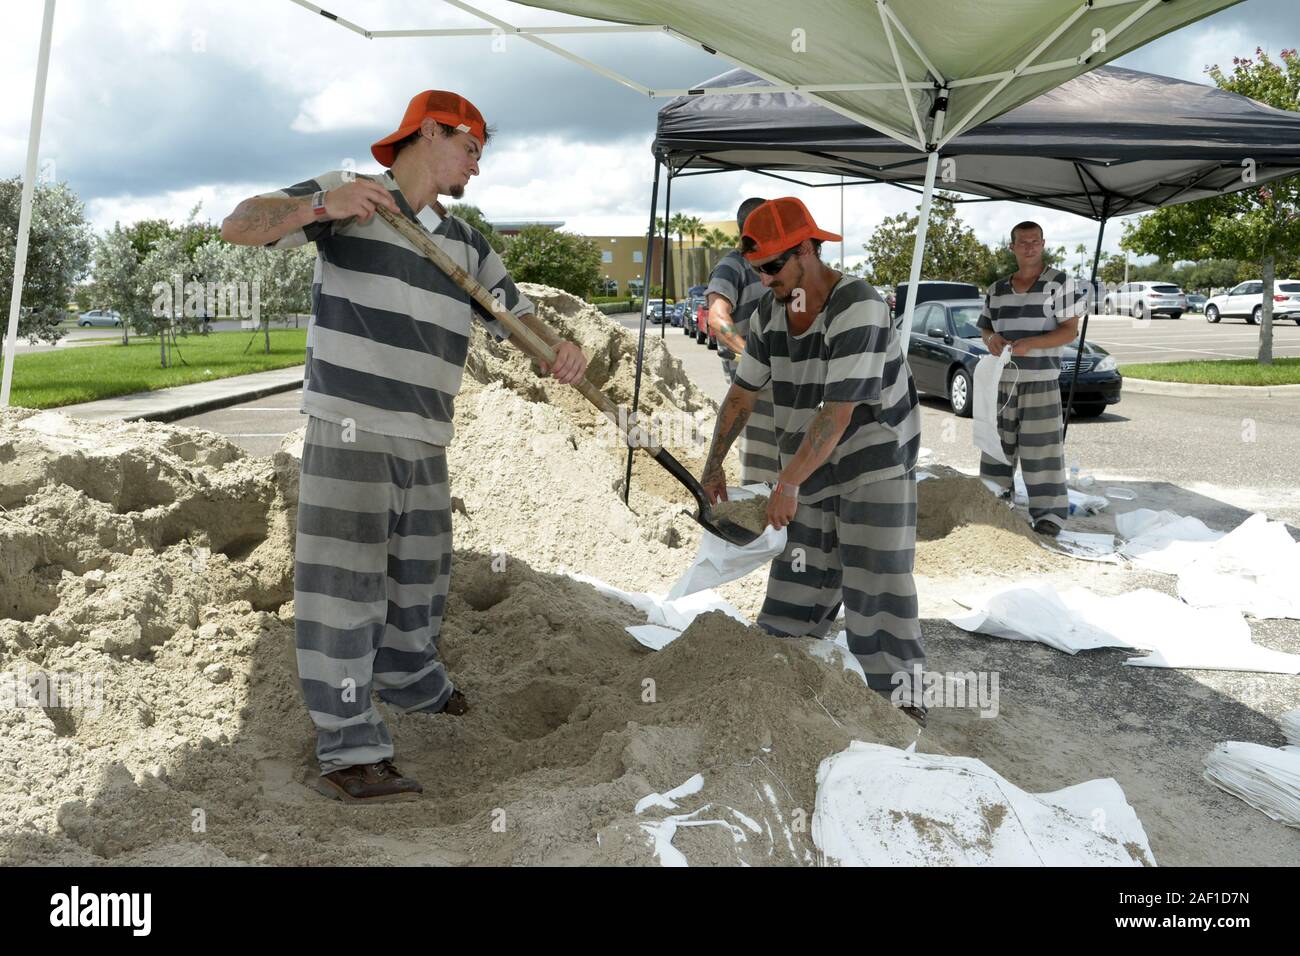 Melbourne, United States. 12th Dec, 2019. In preparation for Hurricane Dorian, inmates from Brevard County Jail fill sandbags and place them into the vehicles of waiting motorists near Melbourne, Florida, on Thursday, August 29, 2019. Central Floridians are making preparations for the storm, which is anticipated to grow into a Category 4 system as it approaches the area sometime on Monday. Photo by Joe Marino/UPI Credit: UPI/Alamy Live News Stock Photo